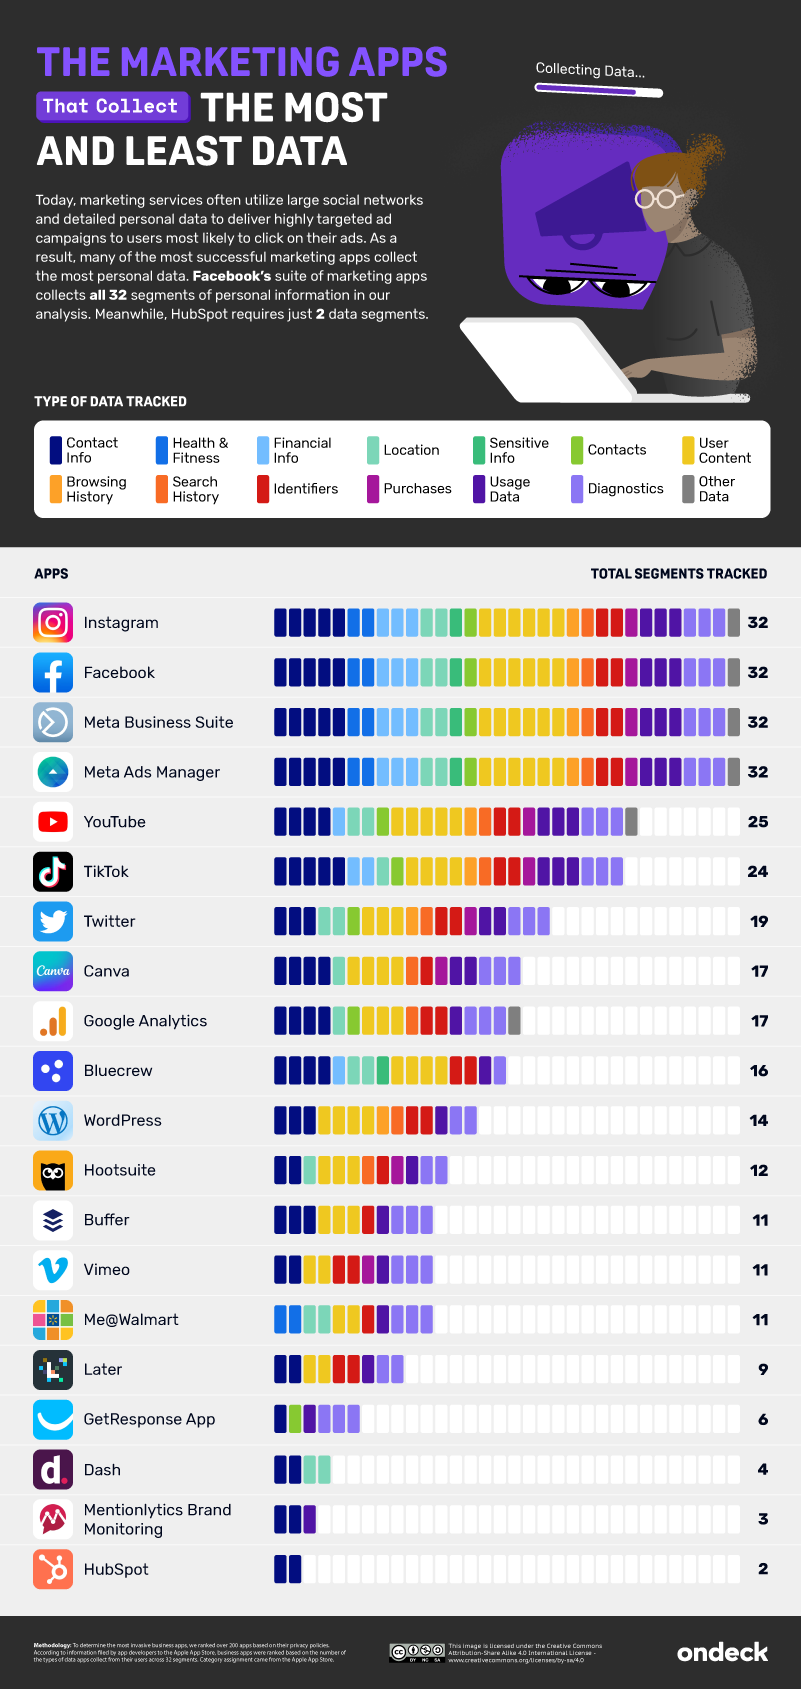 Facebook's Suite of Apps Collect the Most Data, Hubspot the Least